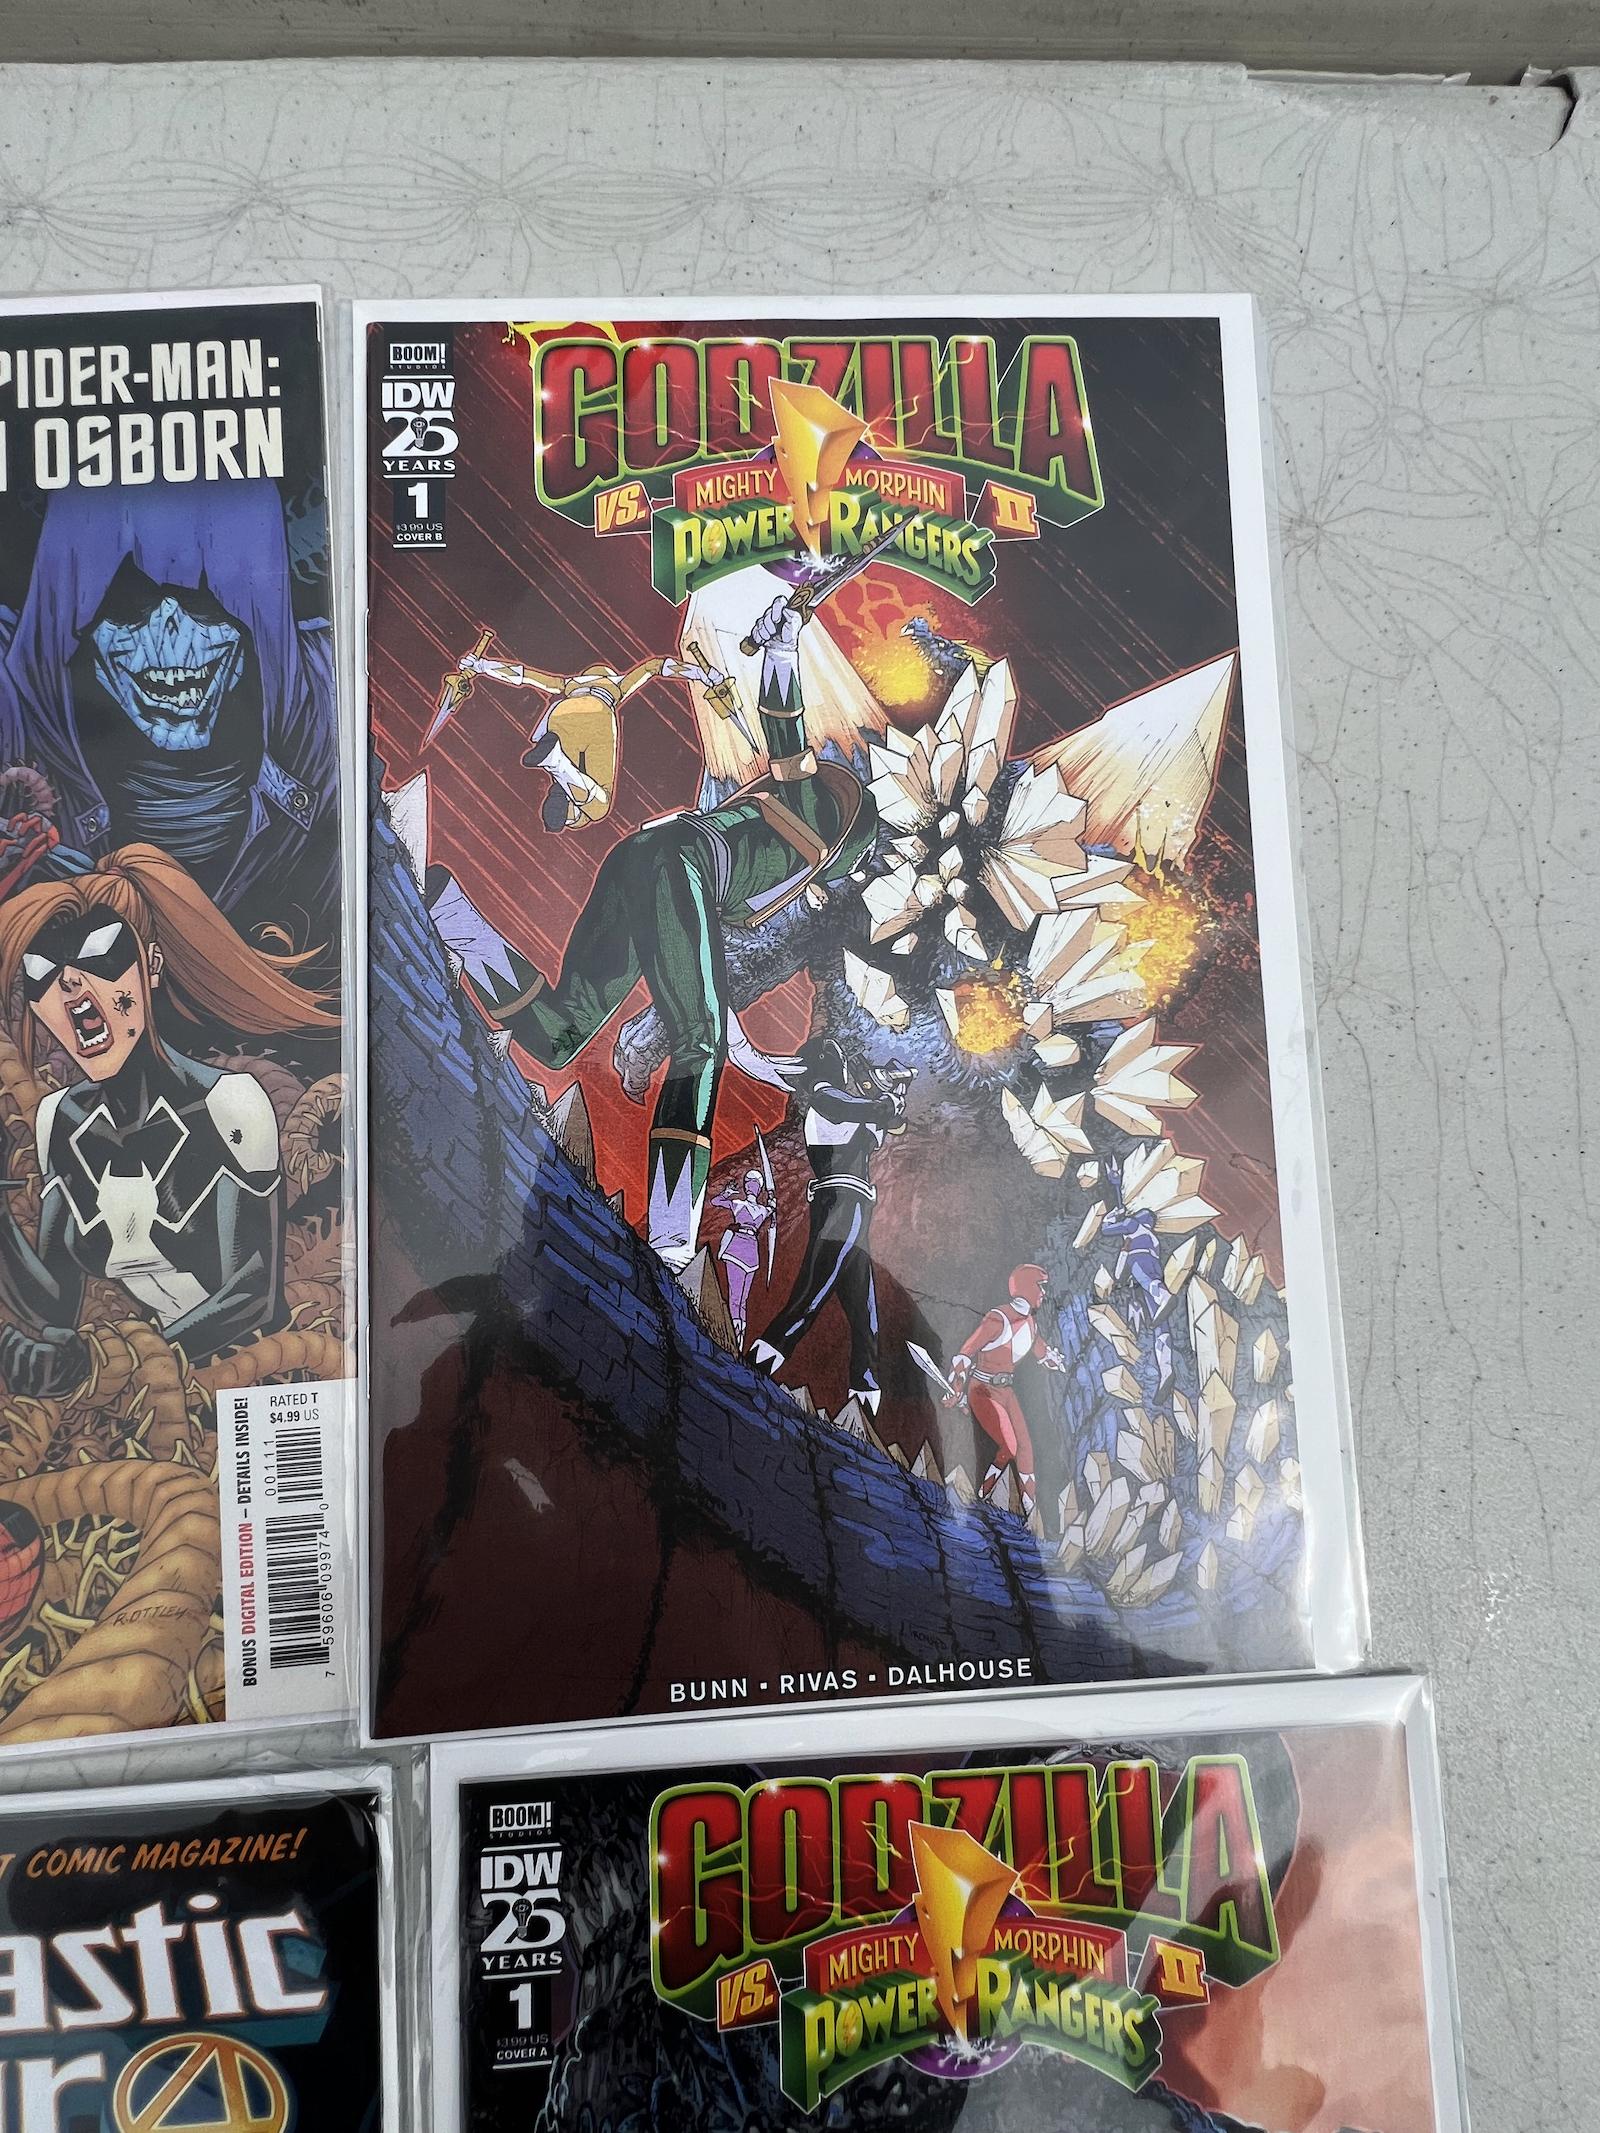 Comic Book collection lot 4 NF